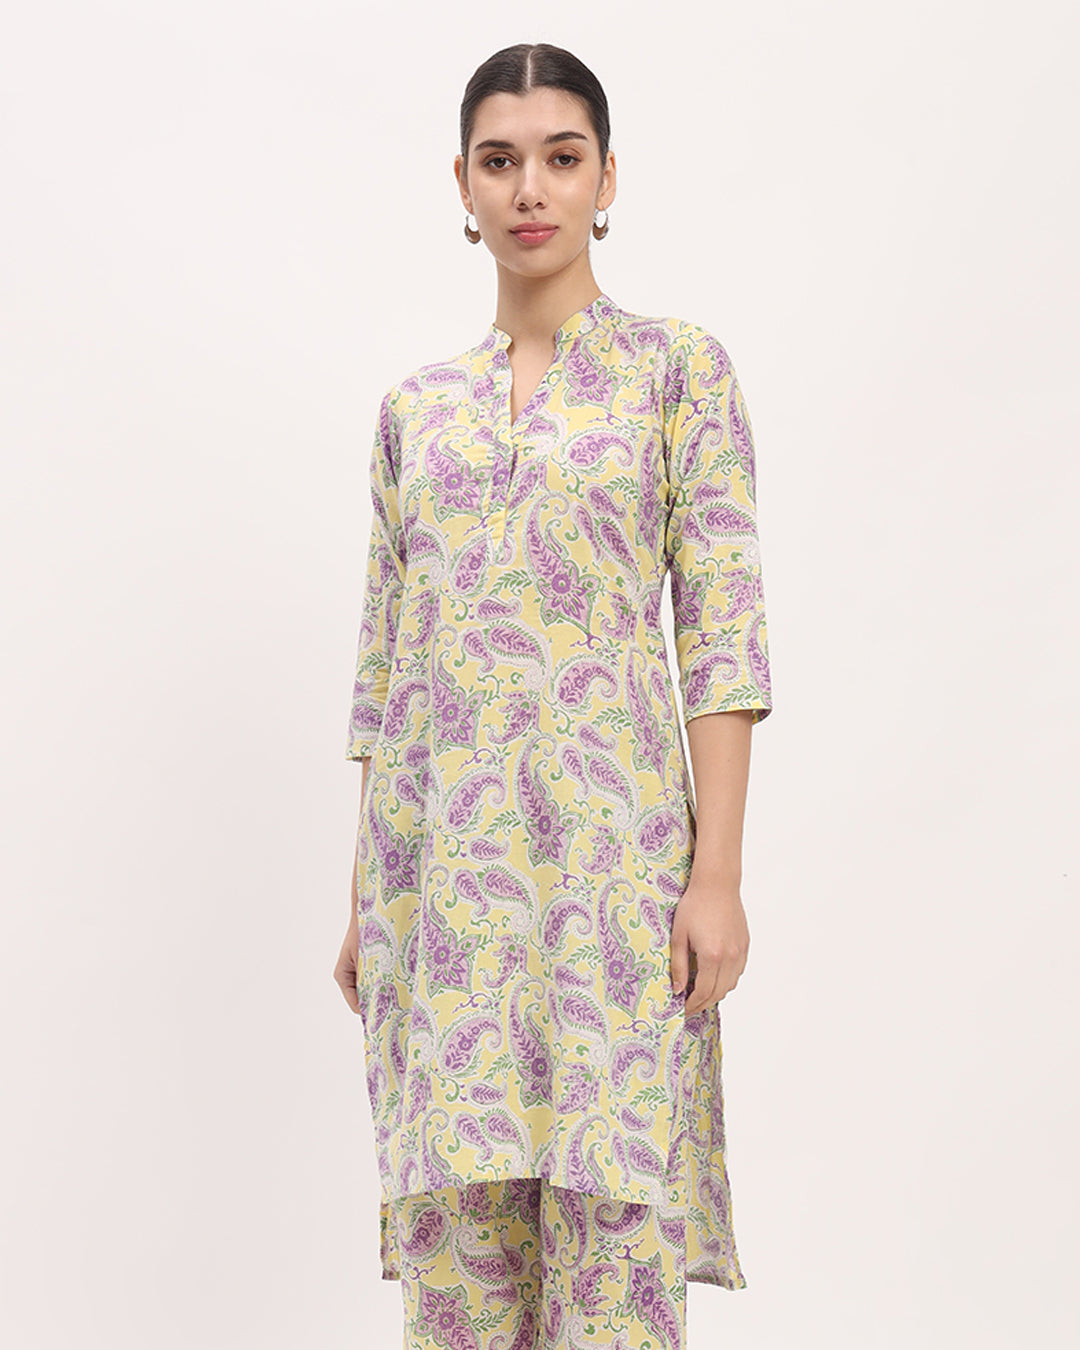 Lavender Paisely High-Low Printed Kurta (Without Bottoms)